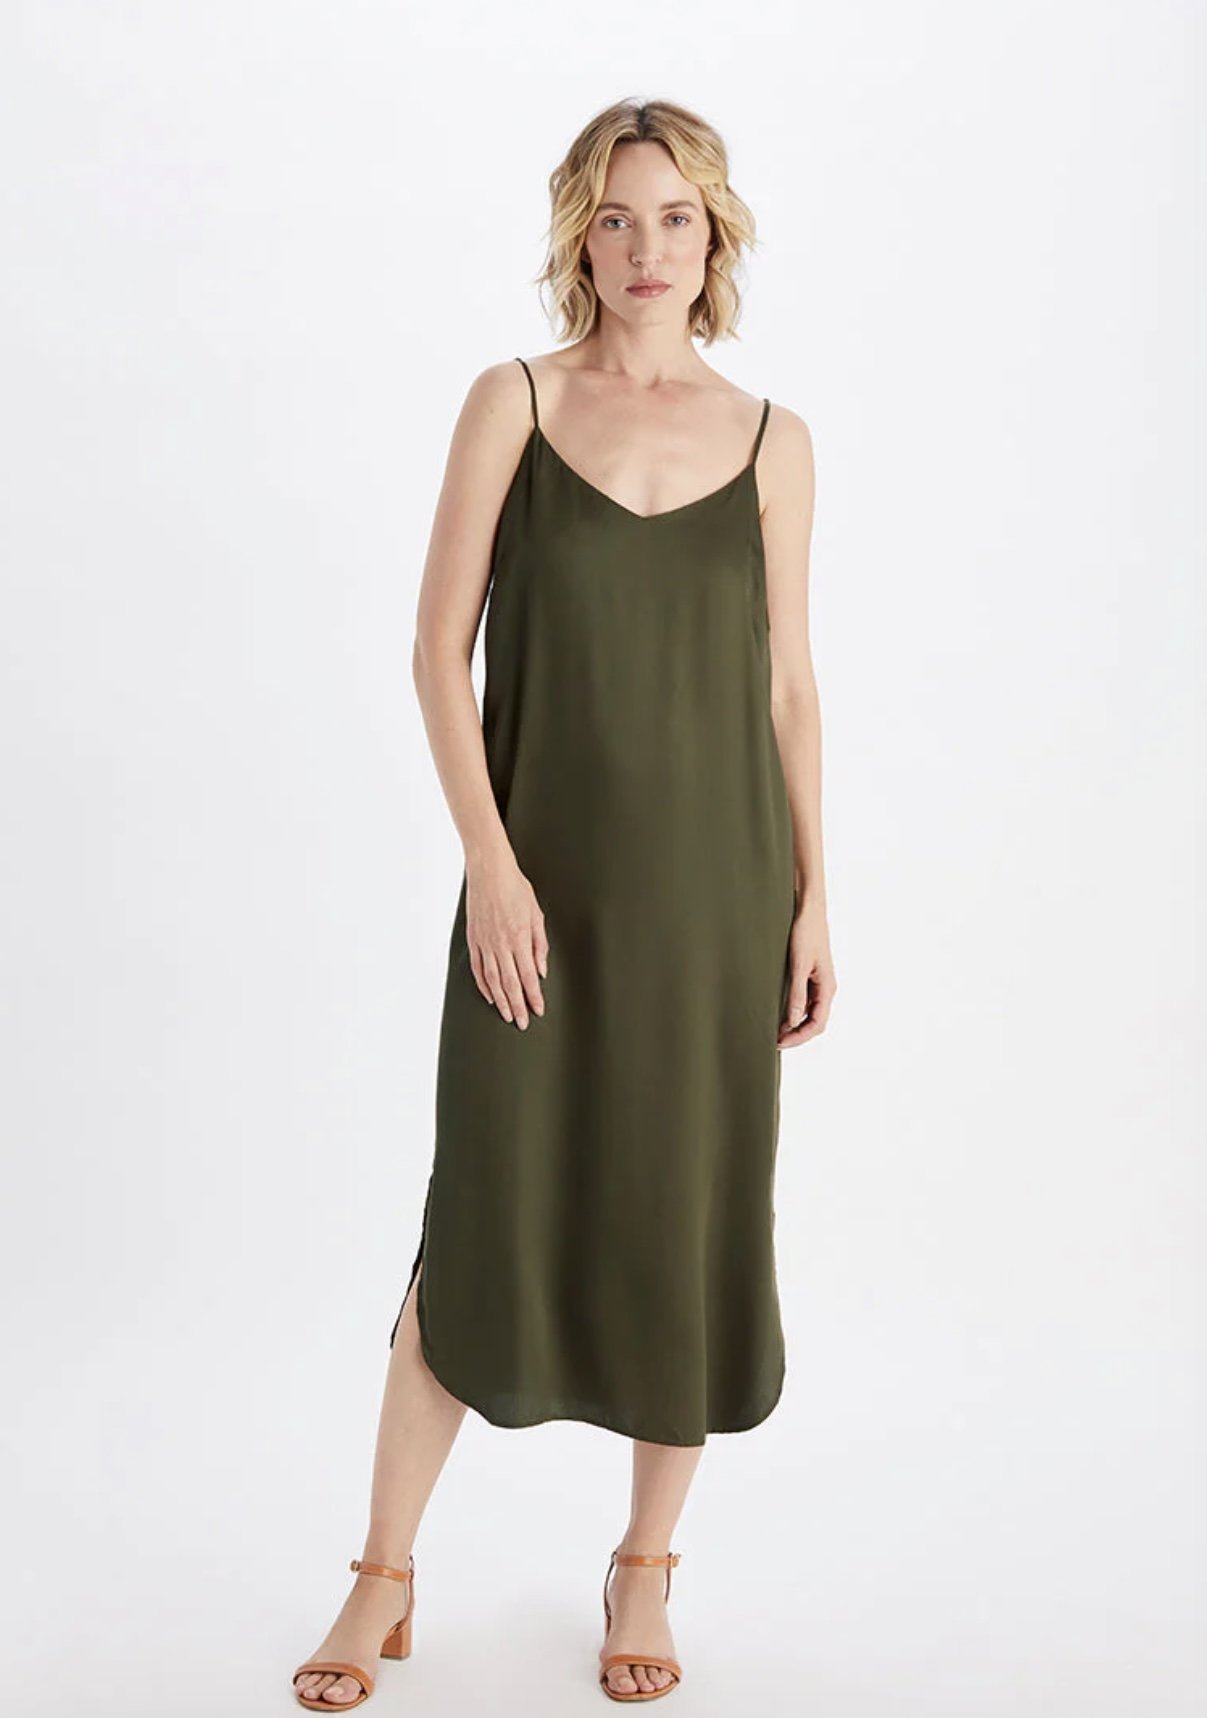 I Have This Sustainable Slip Dress in 2 Styles — The Glow Girl by ...